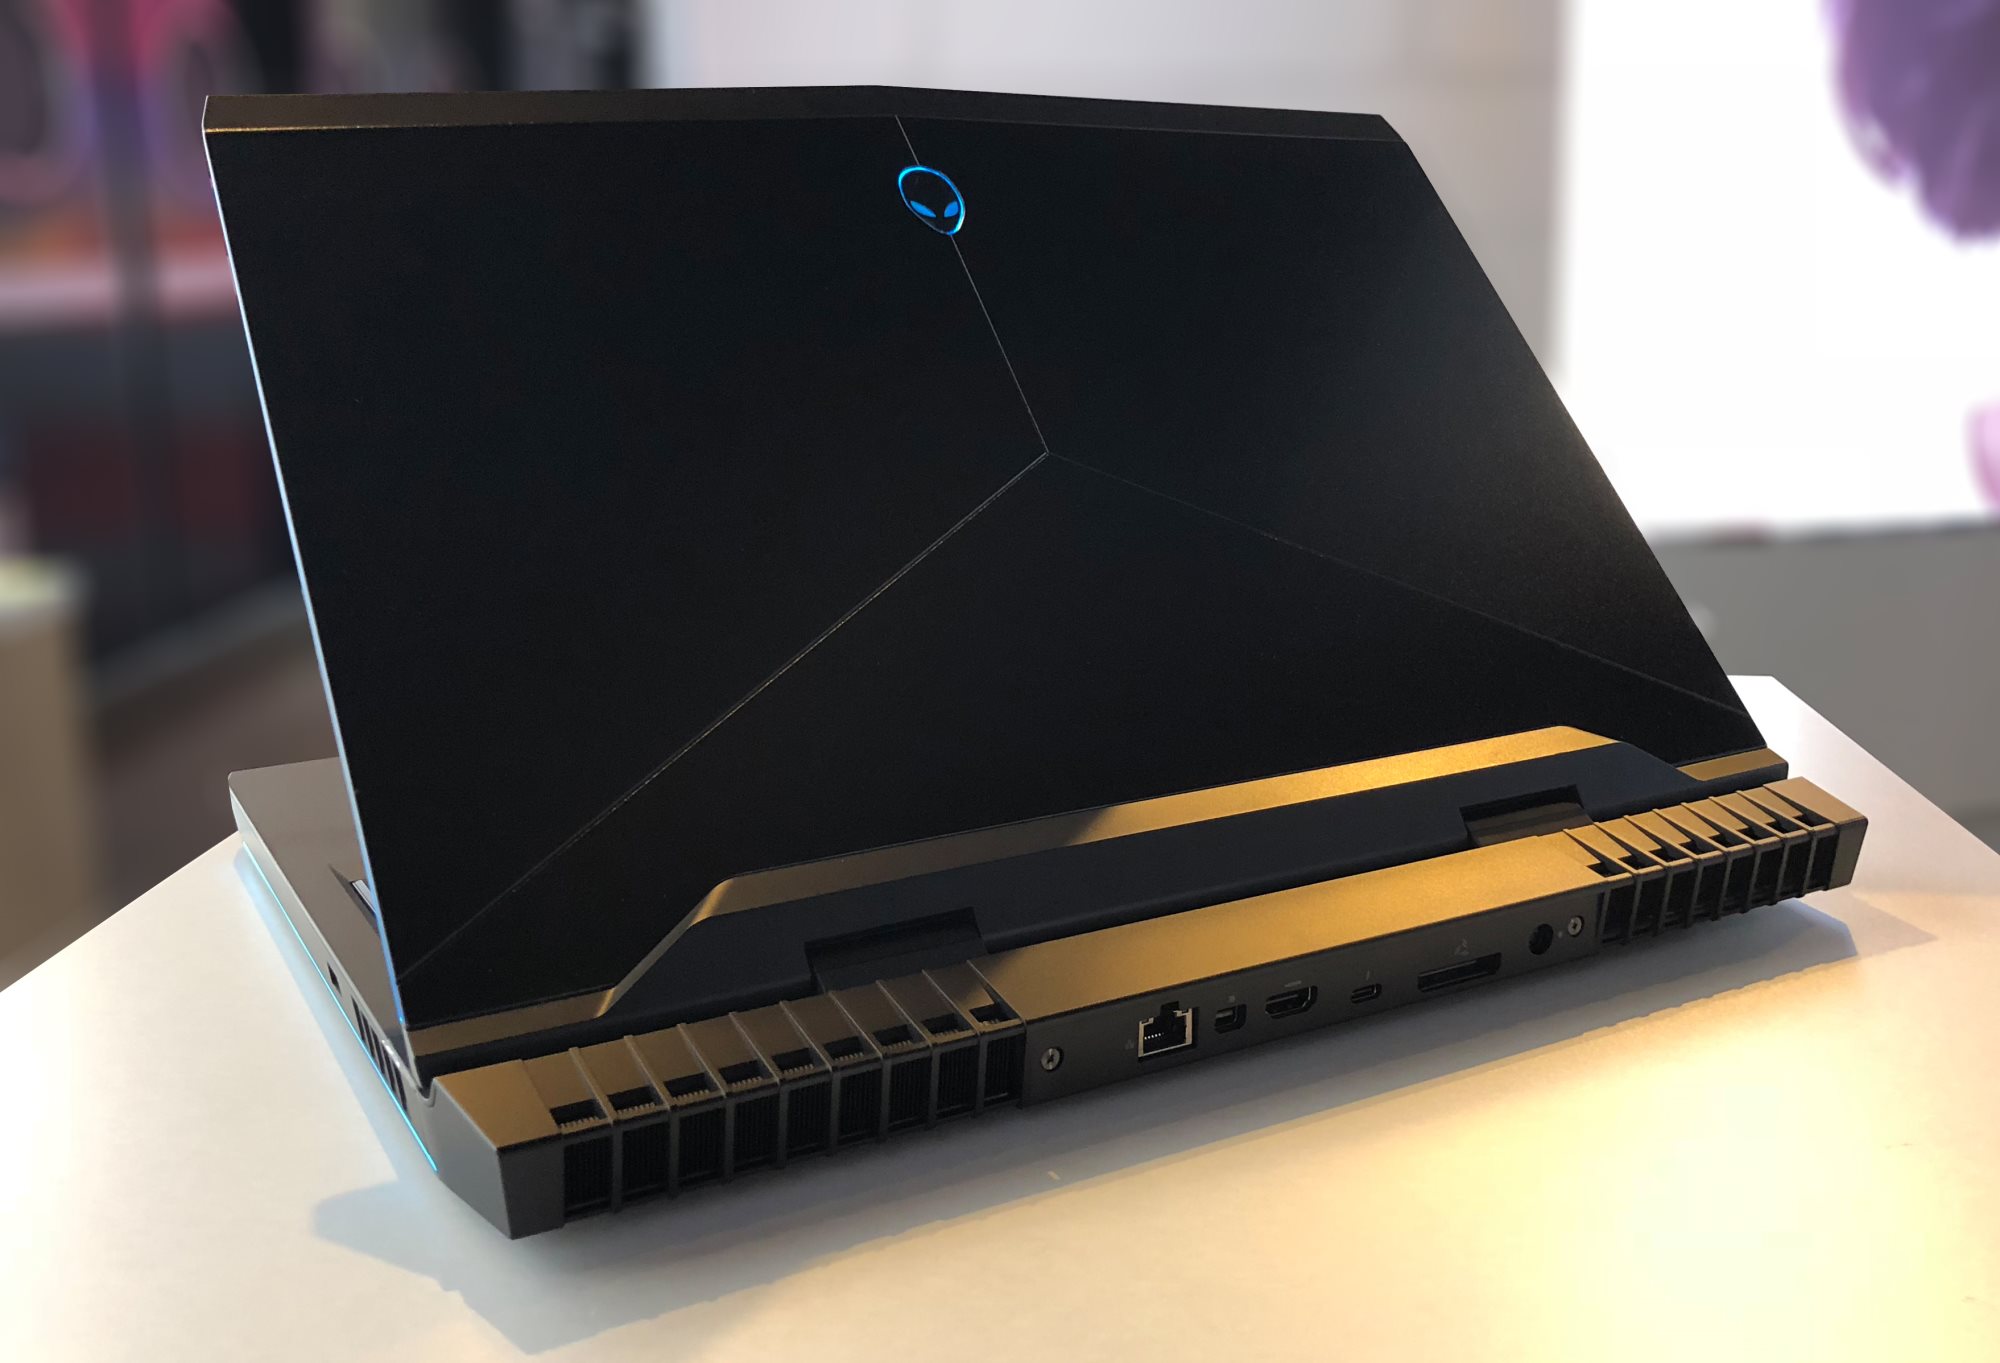 Alienware Laptops: 15R4 and 17R5 - Dell's Spring Range: New 8th 